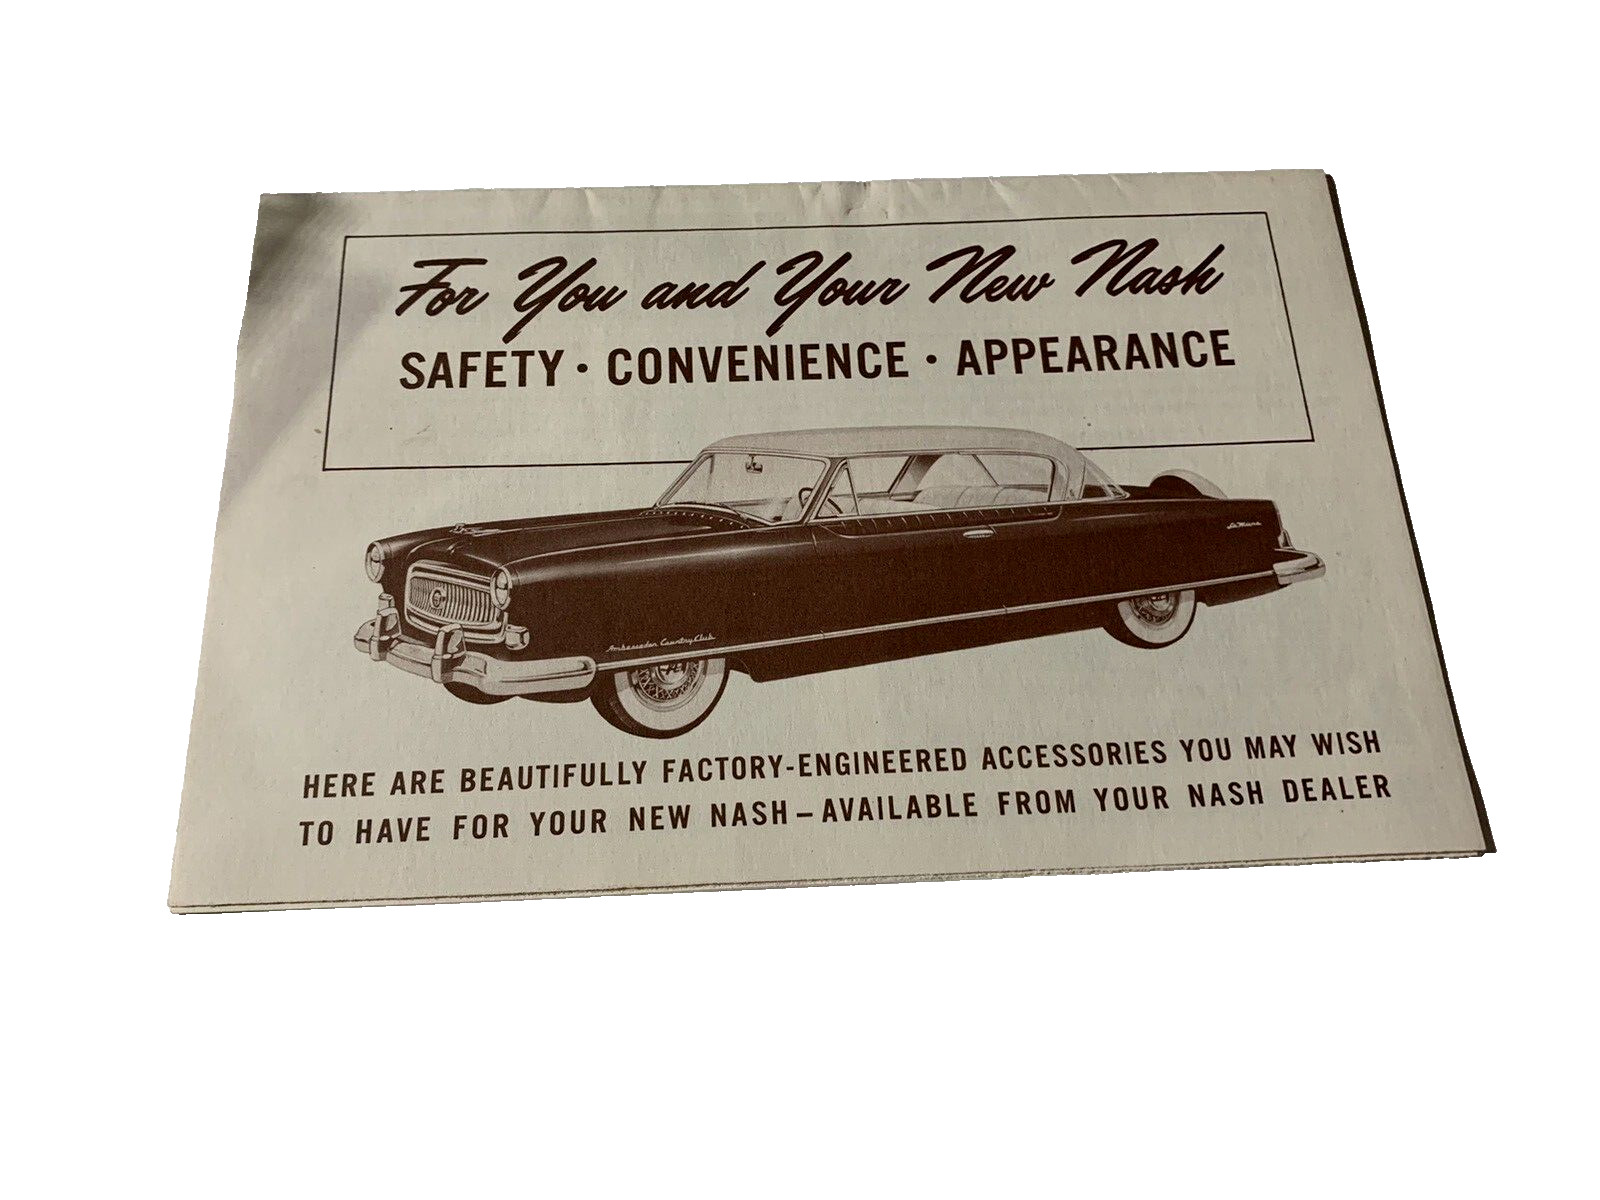 1950's Nash safety- conveniece-appearance & accessories foldout